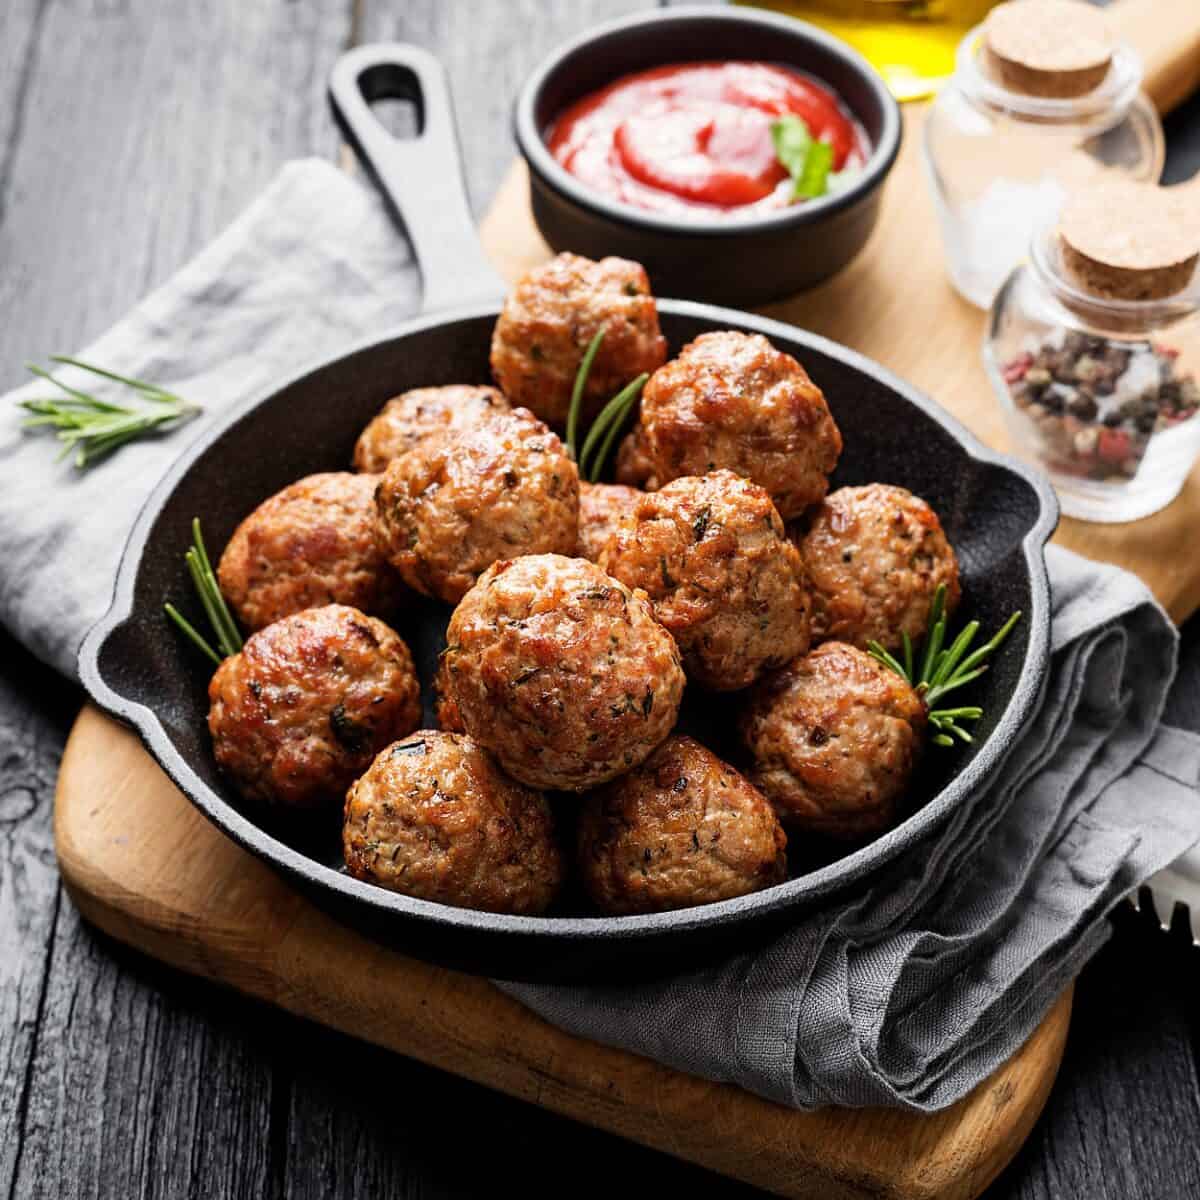 How to Make Meatballs without Breadcrumbs